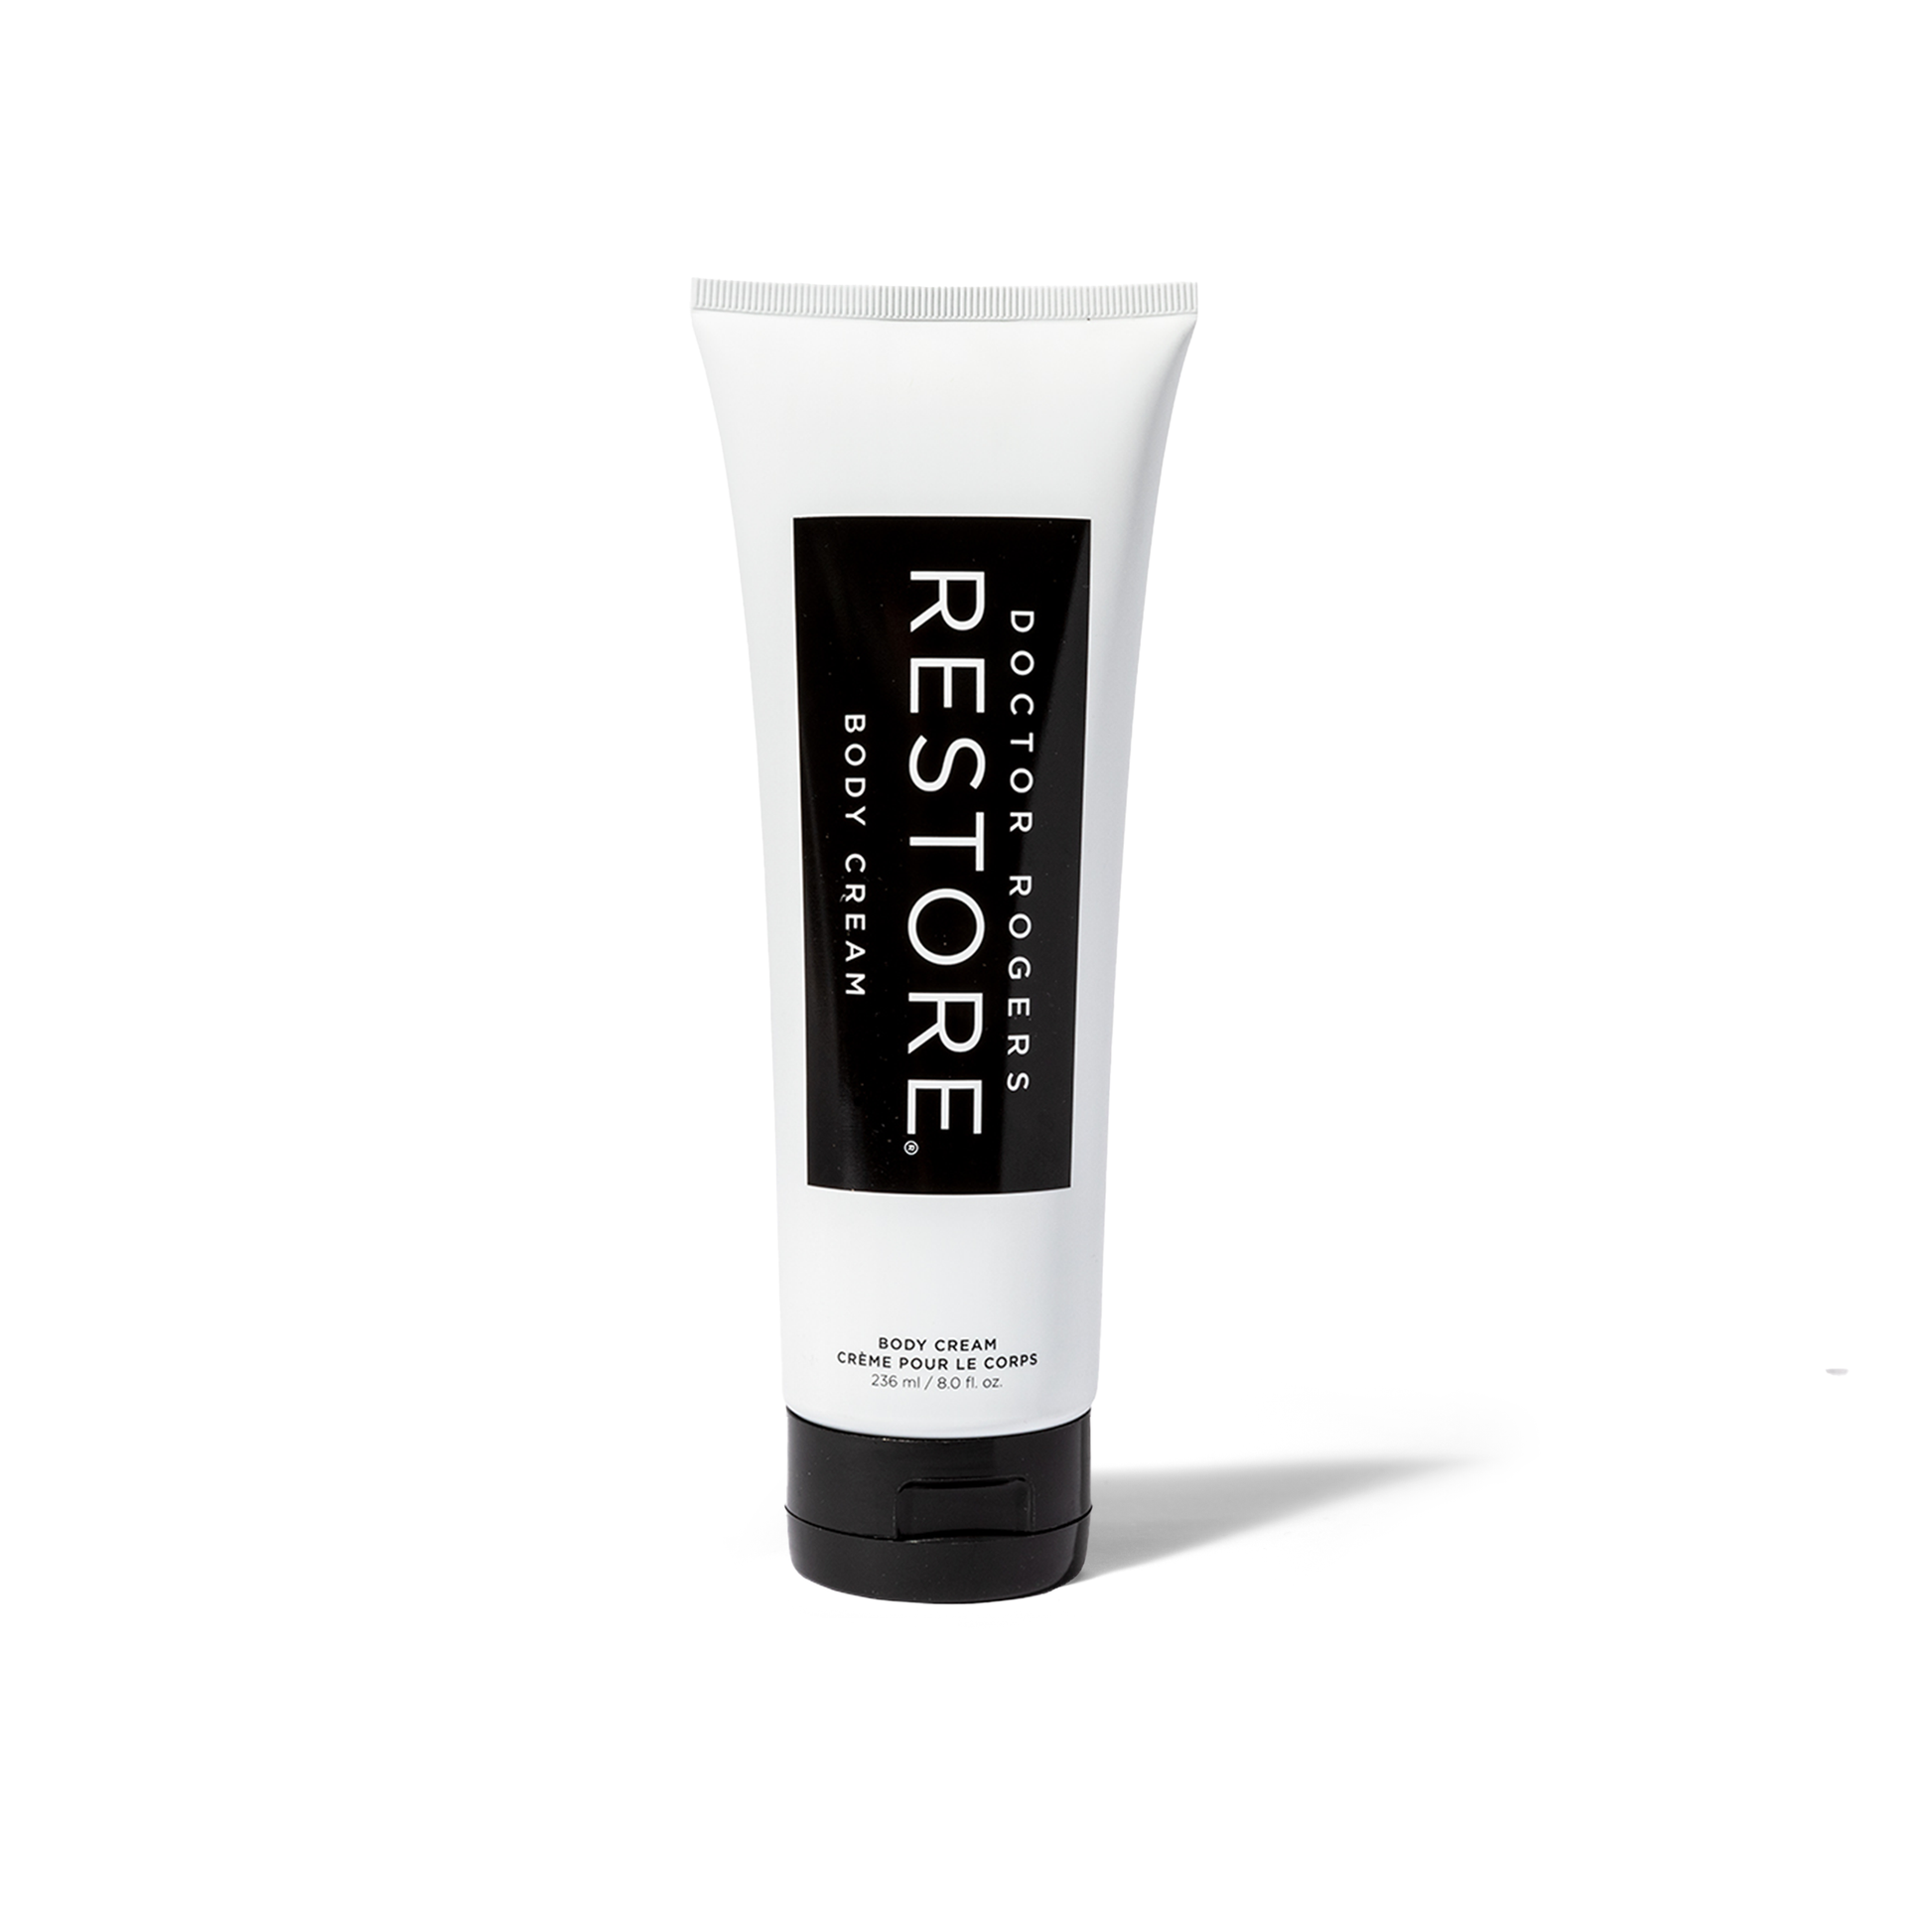 Best thick and rich moisturizing, smooth Body cream for aging skin on white background. 